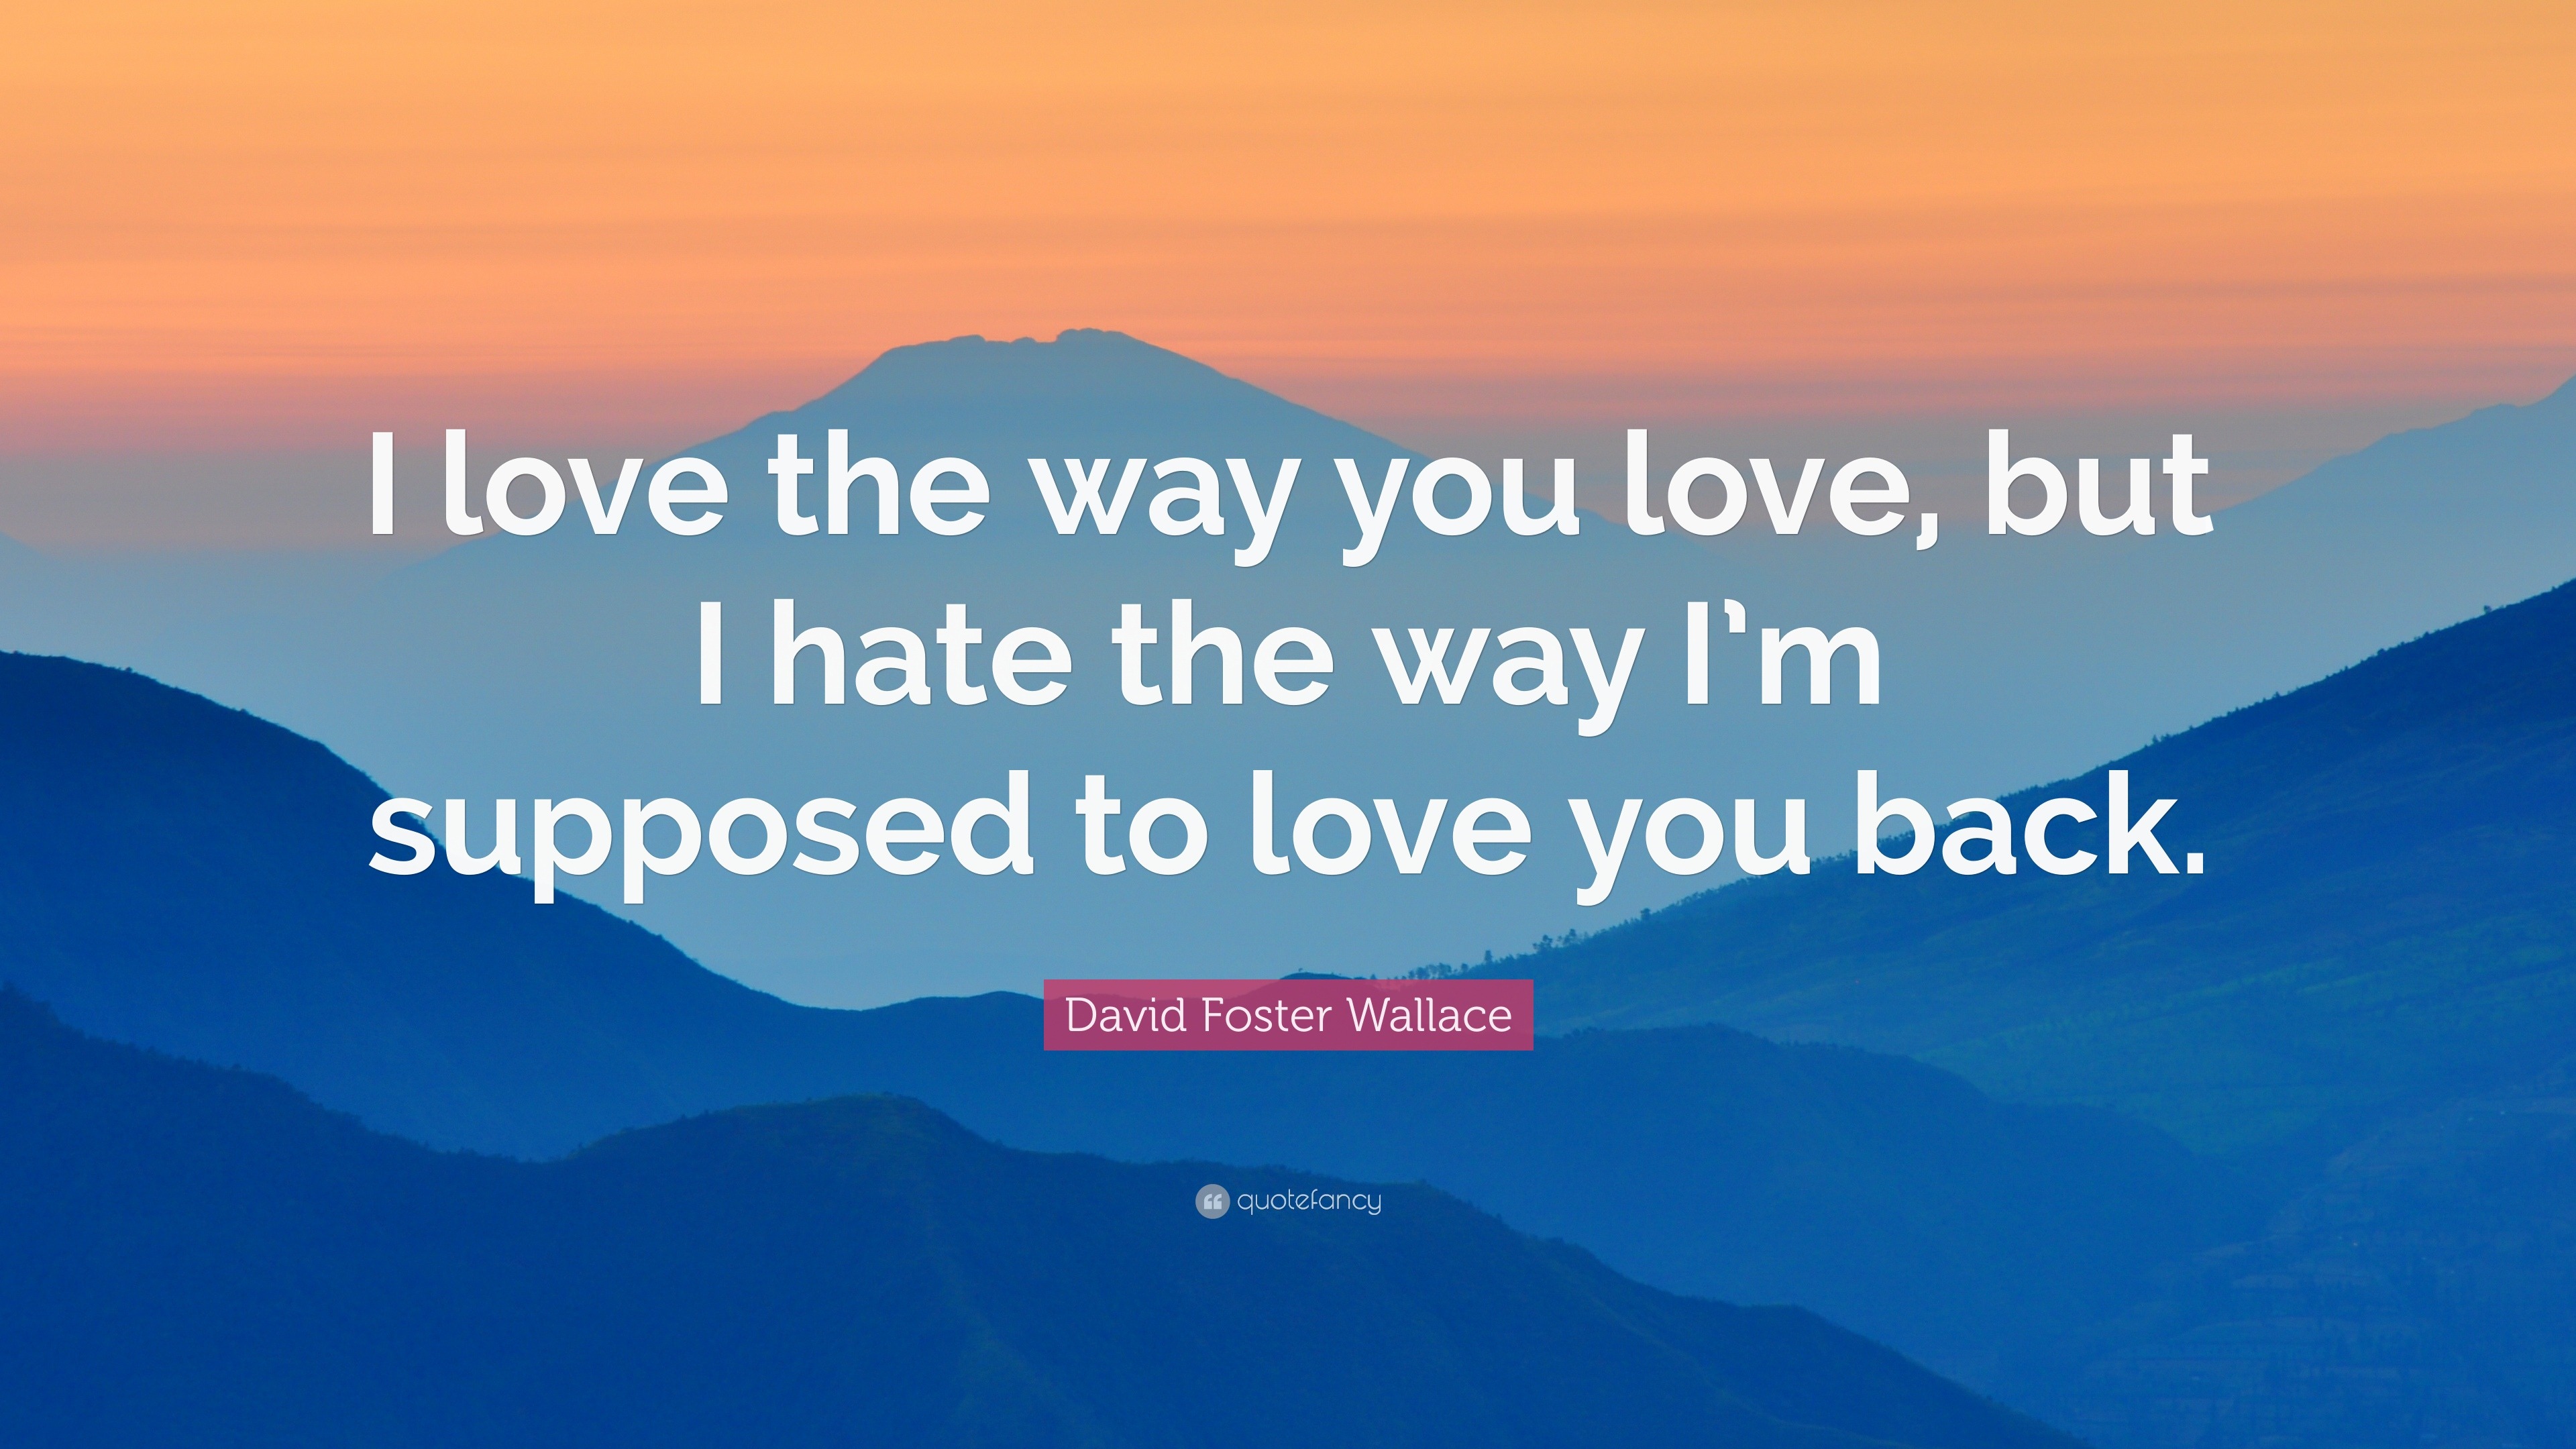 David Foster Wallace Quote “I love the way you love but I hate